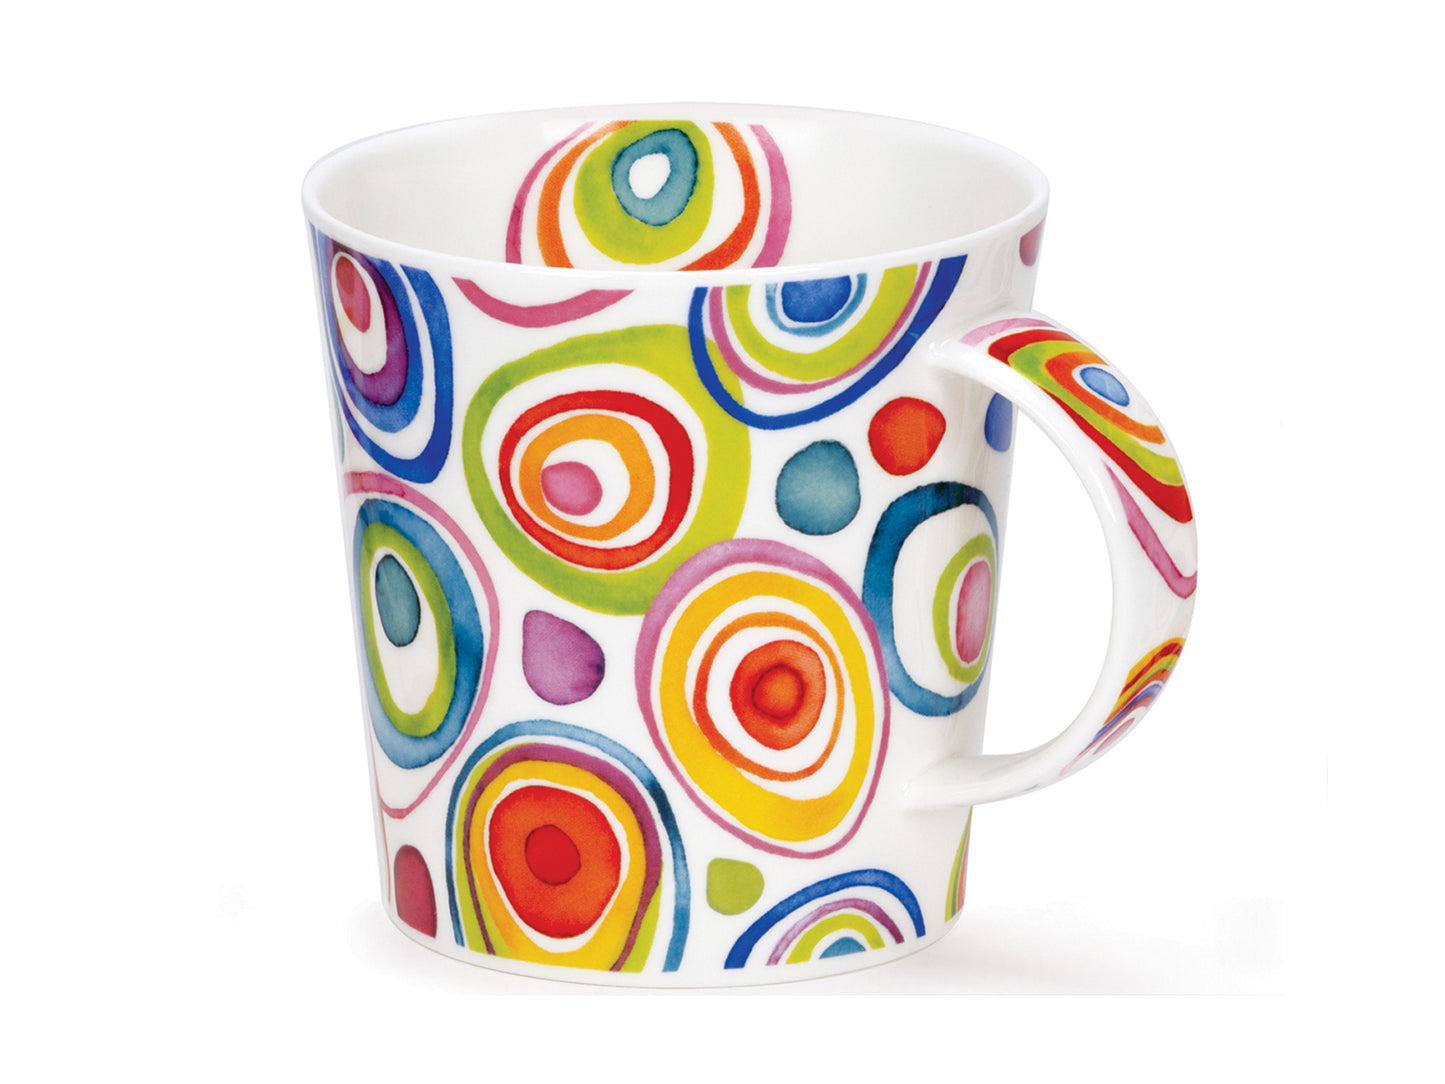 This Dunoon Cairngorm Zoobidoo Mug is crafted of a fine bone china and has a multicolour psychedelic pattern of circles within circles all around its exterior and along its handle. This same pattern can be found printed opposite itself around the inner rim of the mug as well. It is slightly larger and would hold bigger cups of tea or coffee.